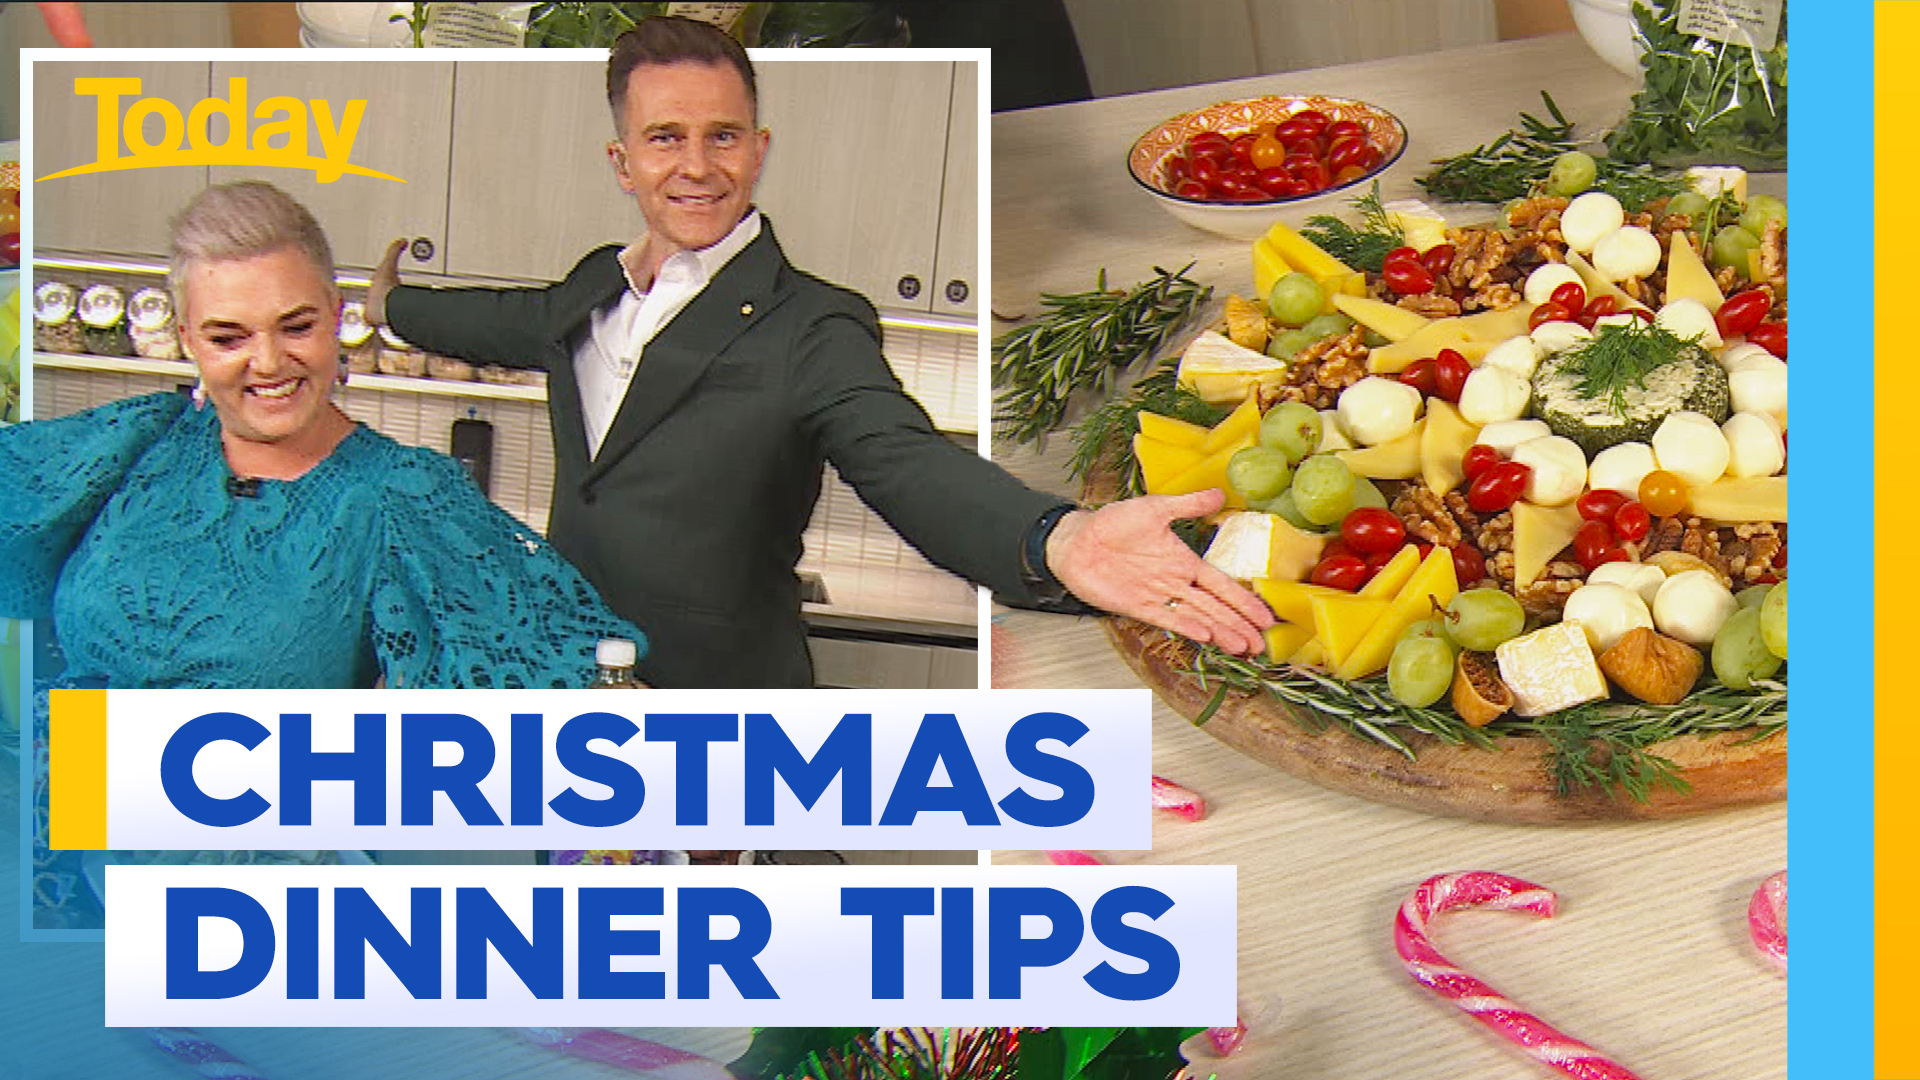 Tips to buy ahead for Christmas dinner